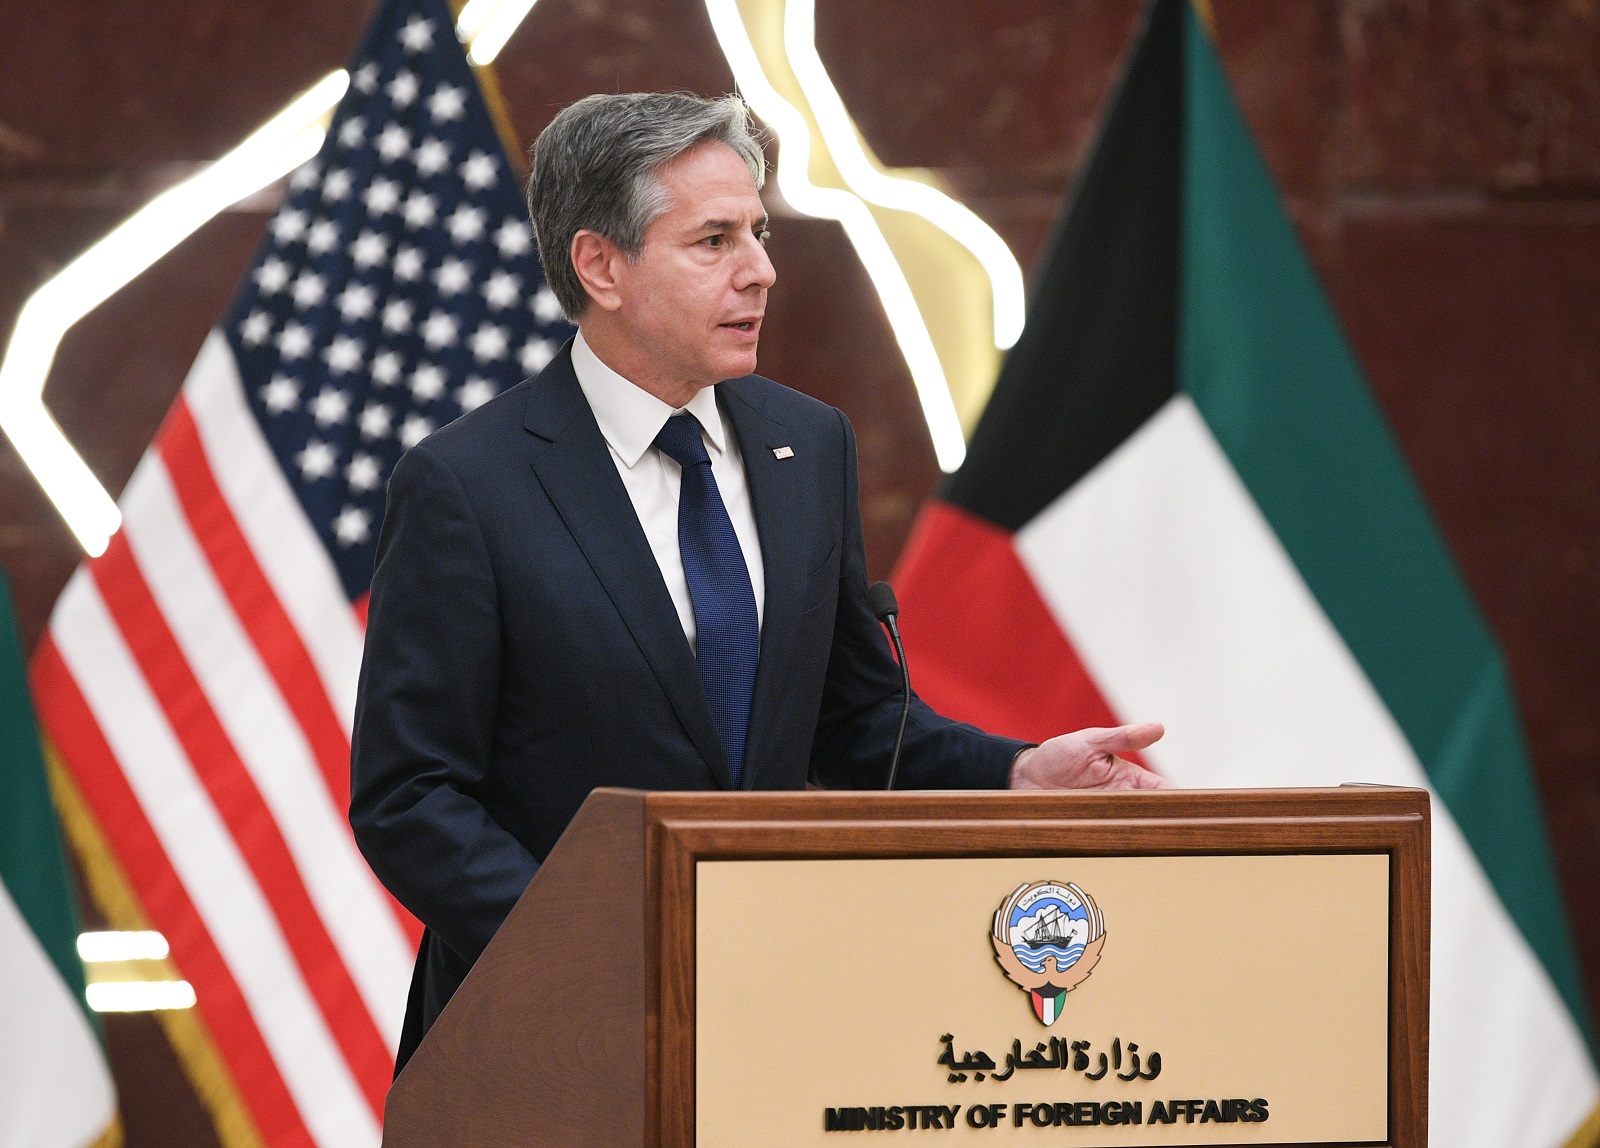 epa09376563 US Secretary of State Antony Blinken speaks during a press conference with Kuwaiti Deputy Prime Minister and Minister of Foreign Affairs at Kuwait Foreign Ministry building, in Kuwait City, Kuwait, 29 July 2021. Blinken is visiting Kuwait for talks with top officials on bilateral cooperation, regional security and investment.  EPA/NOUFAL IBRAHIM